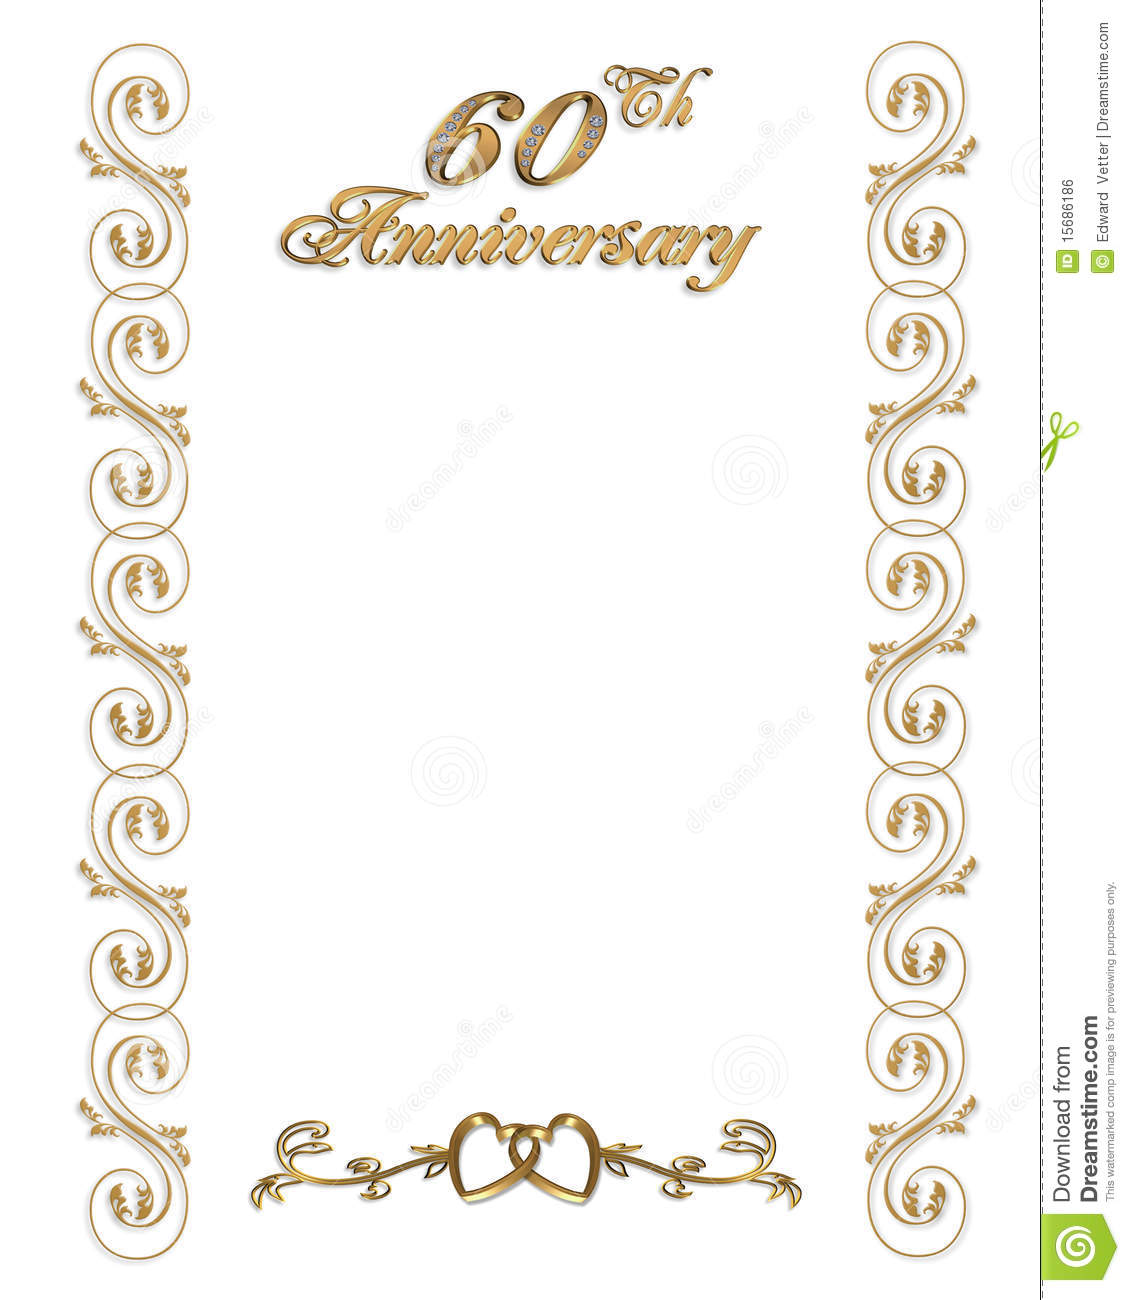 60th-birthday-border-clip-art-images-and-photos-finder